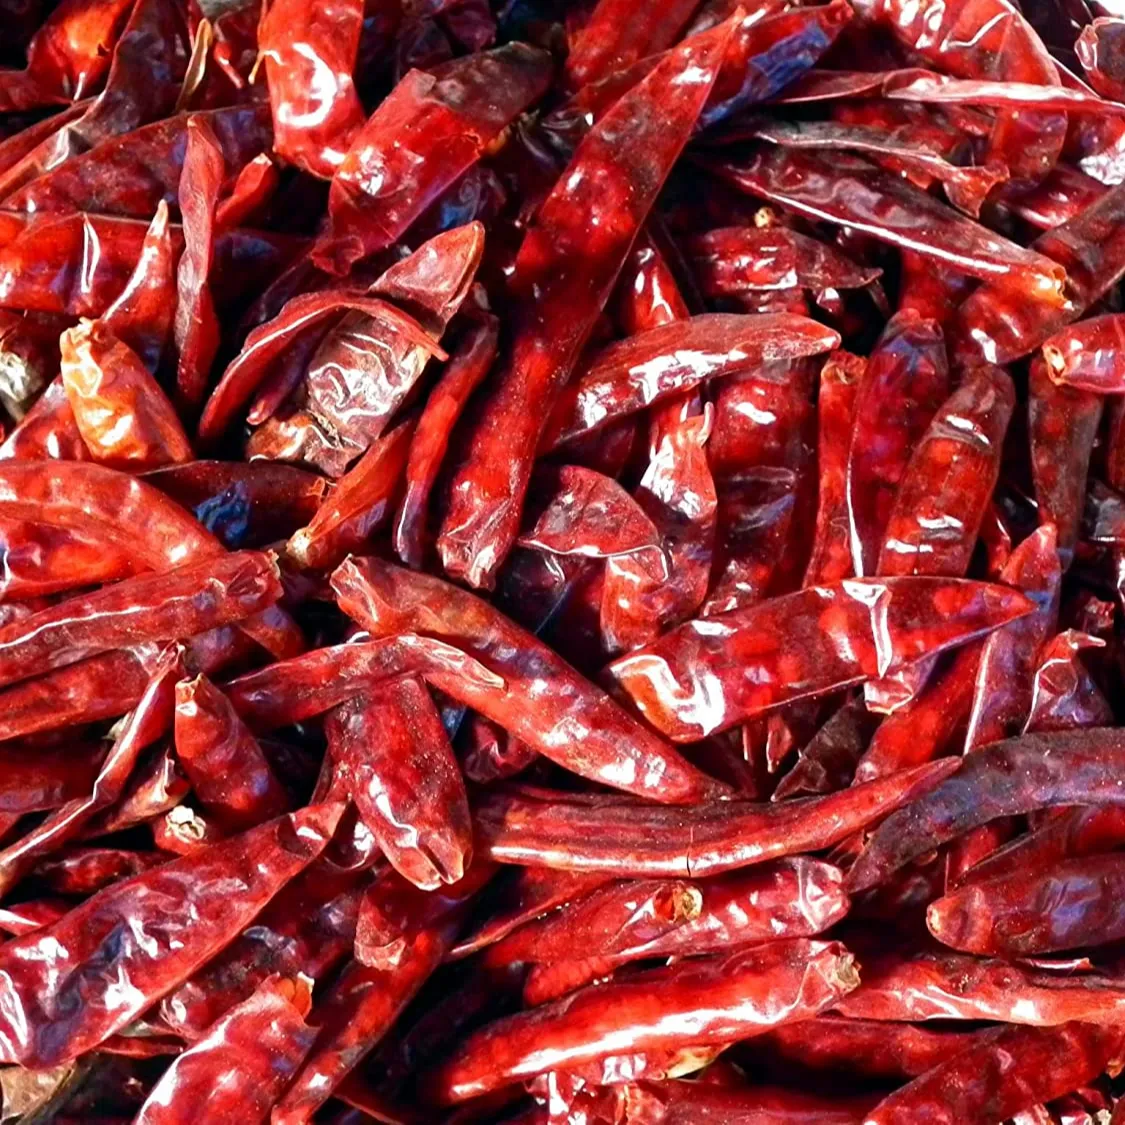 100% Organic Dry Pepper Chili From Vietnam Agri Dry Chili Red Dried with Best Quality and Price